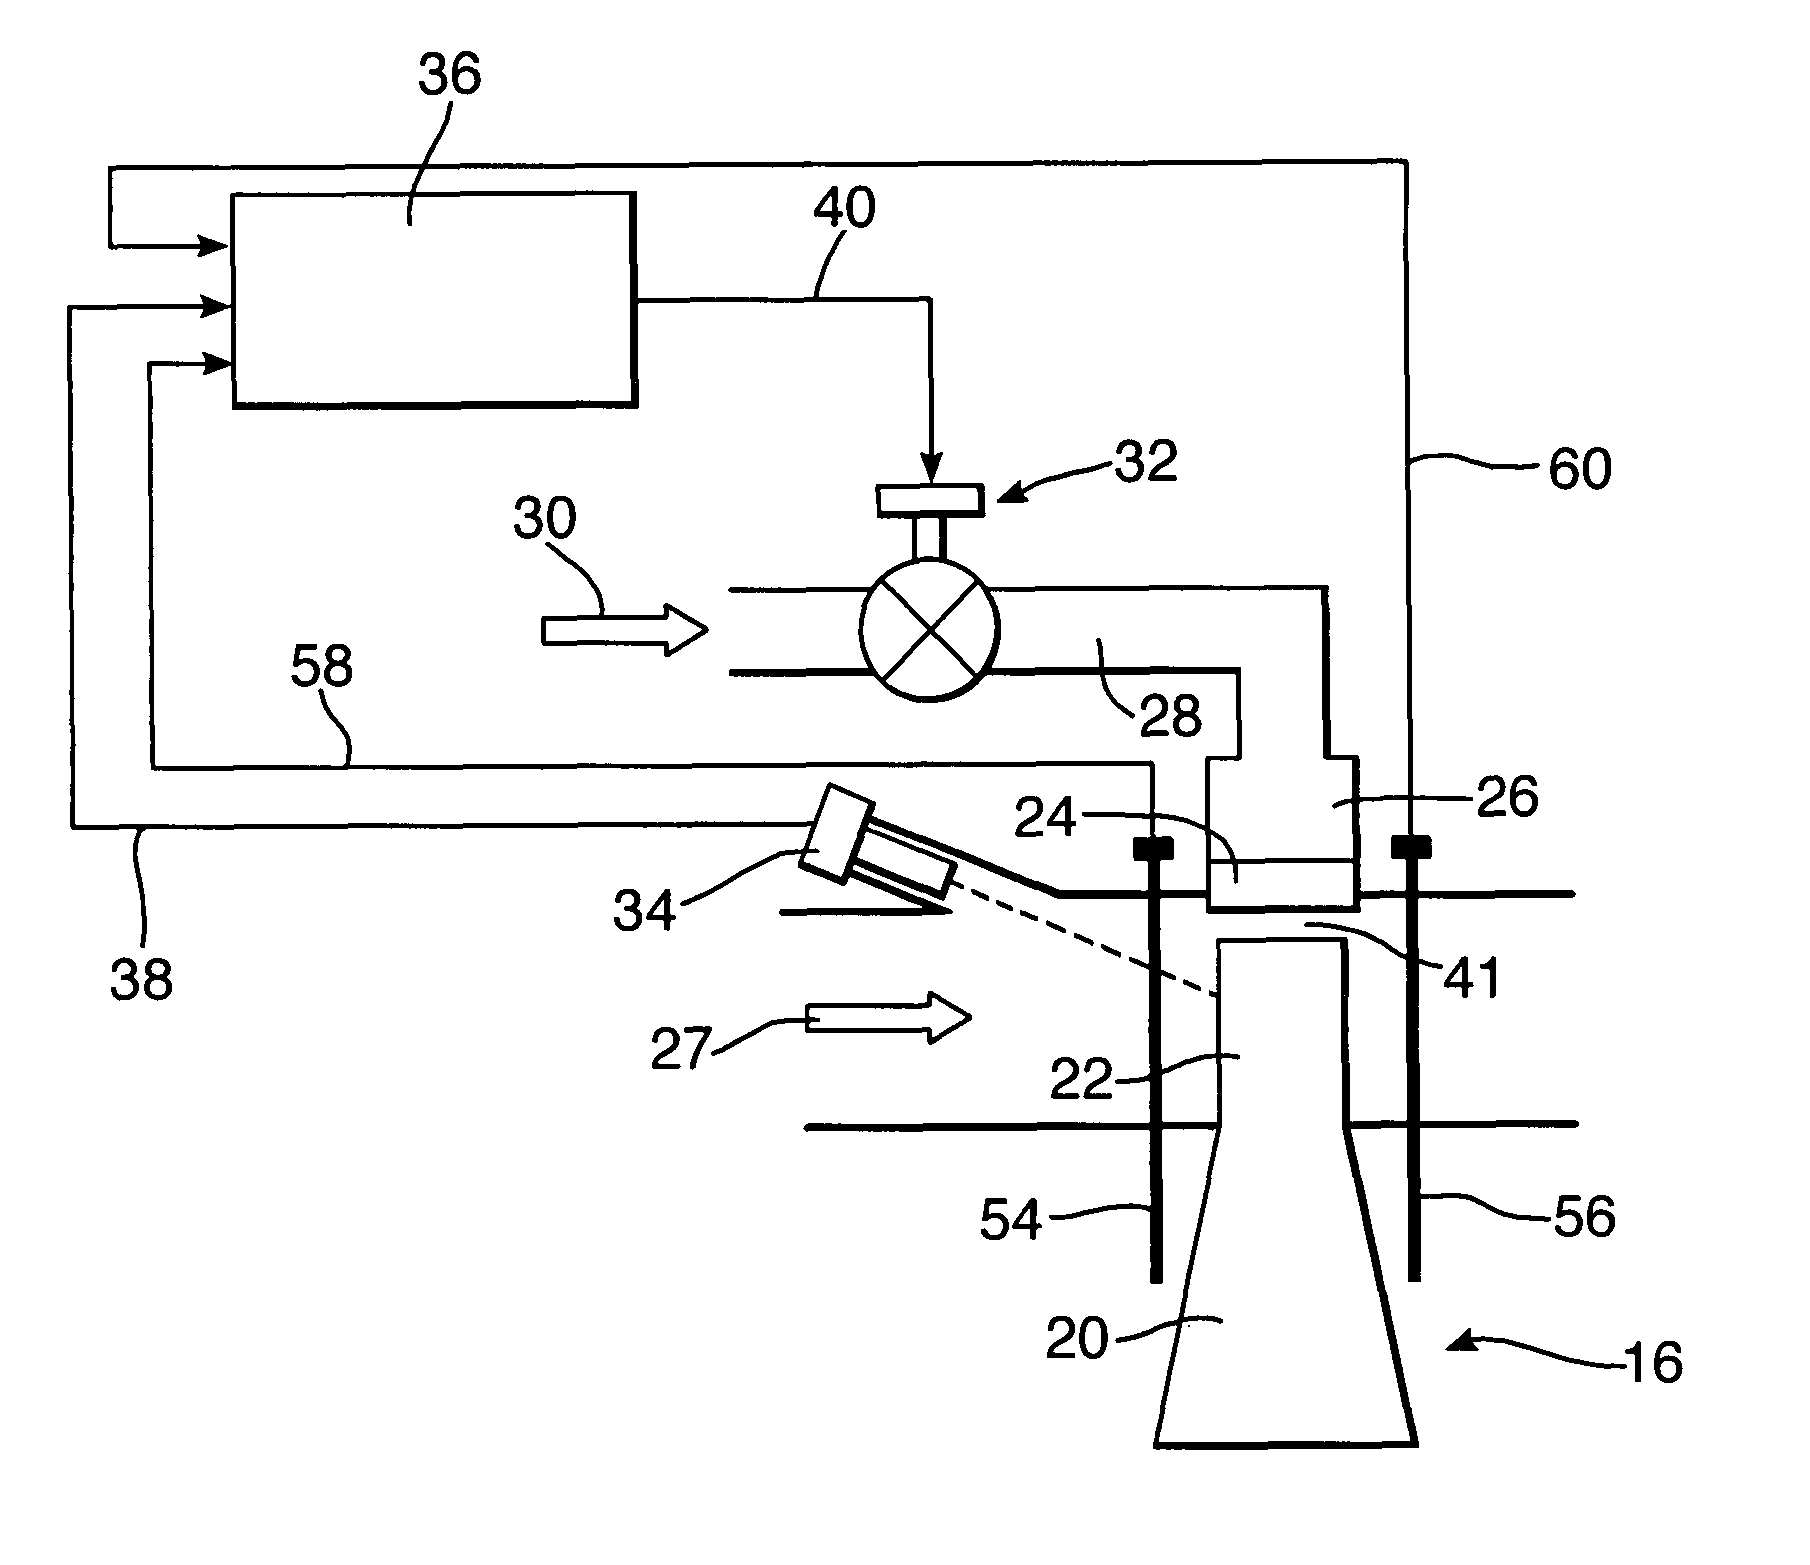 Clearance control apparatus